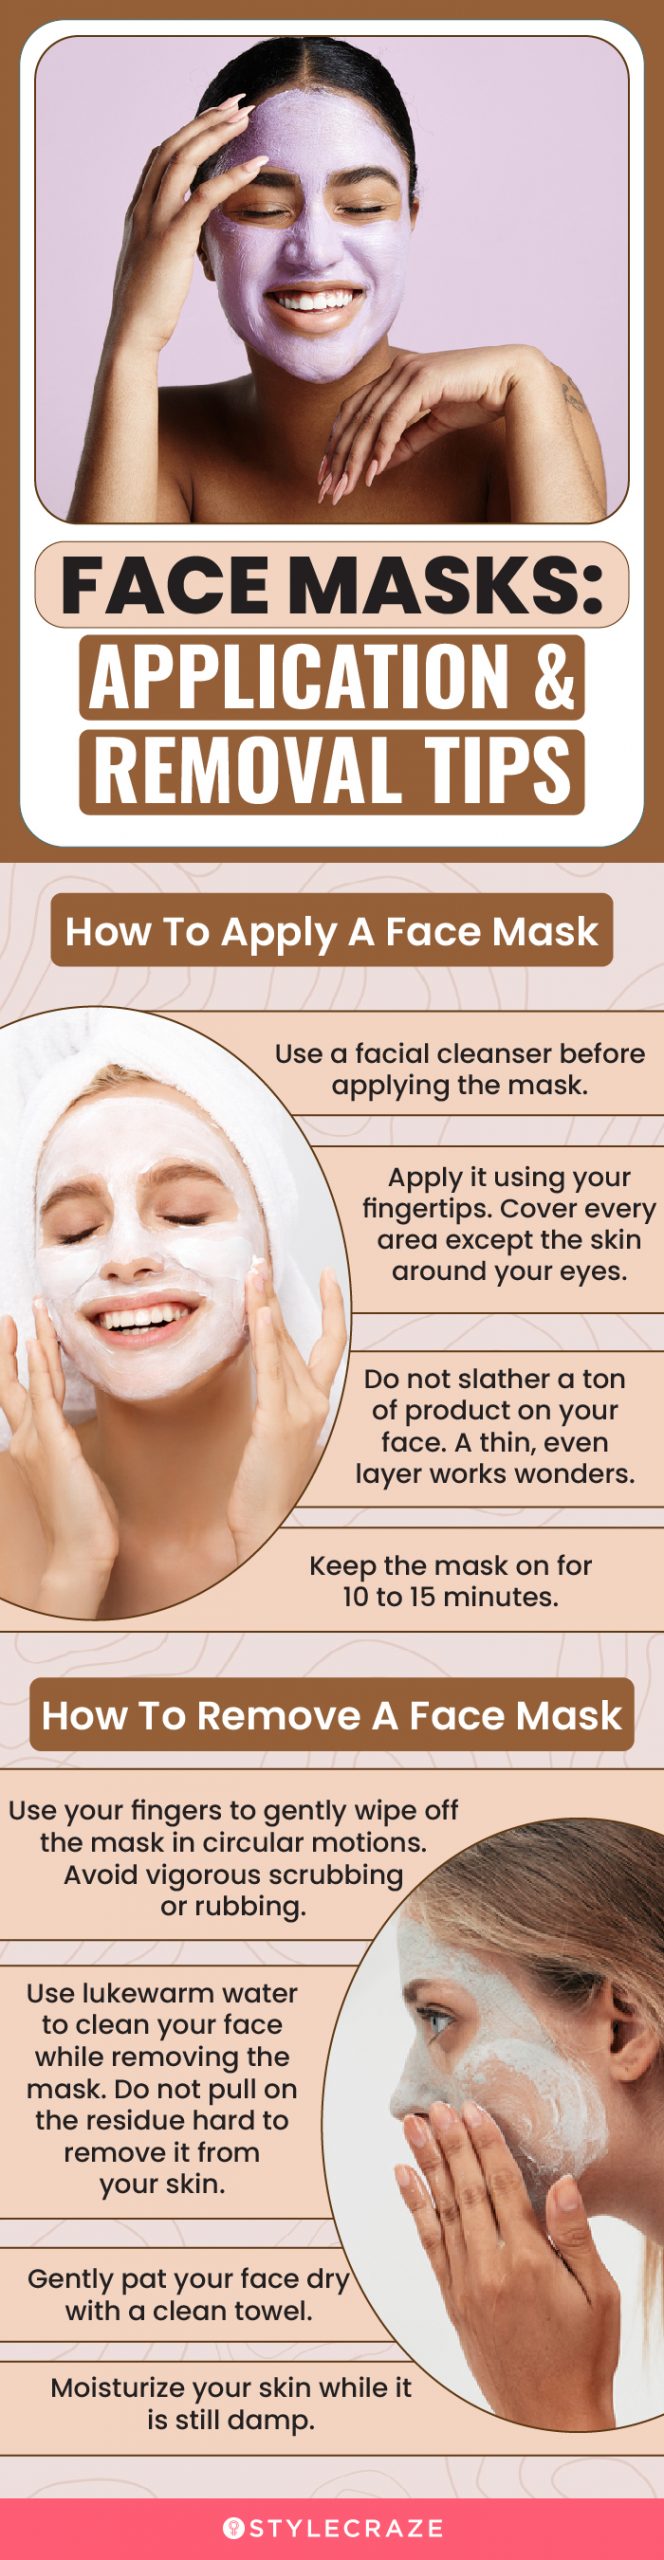 Face Masks: Application & Removal Tips (infographic)